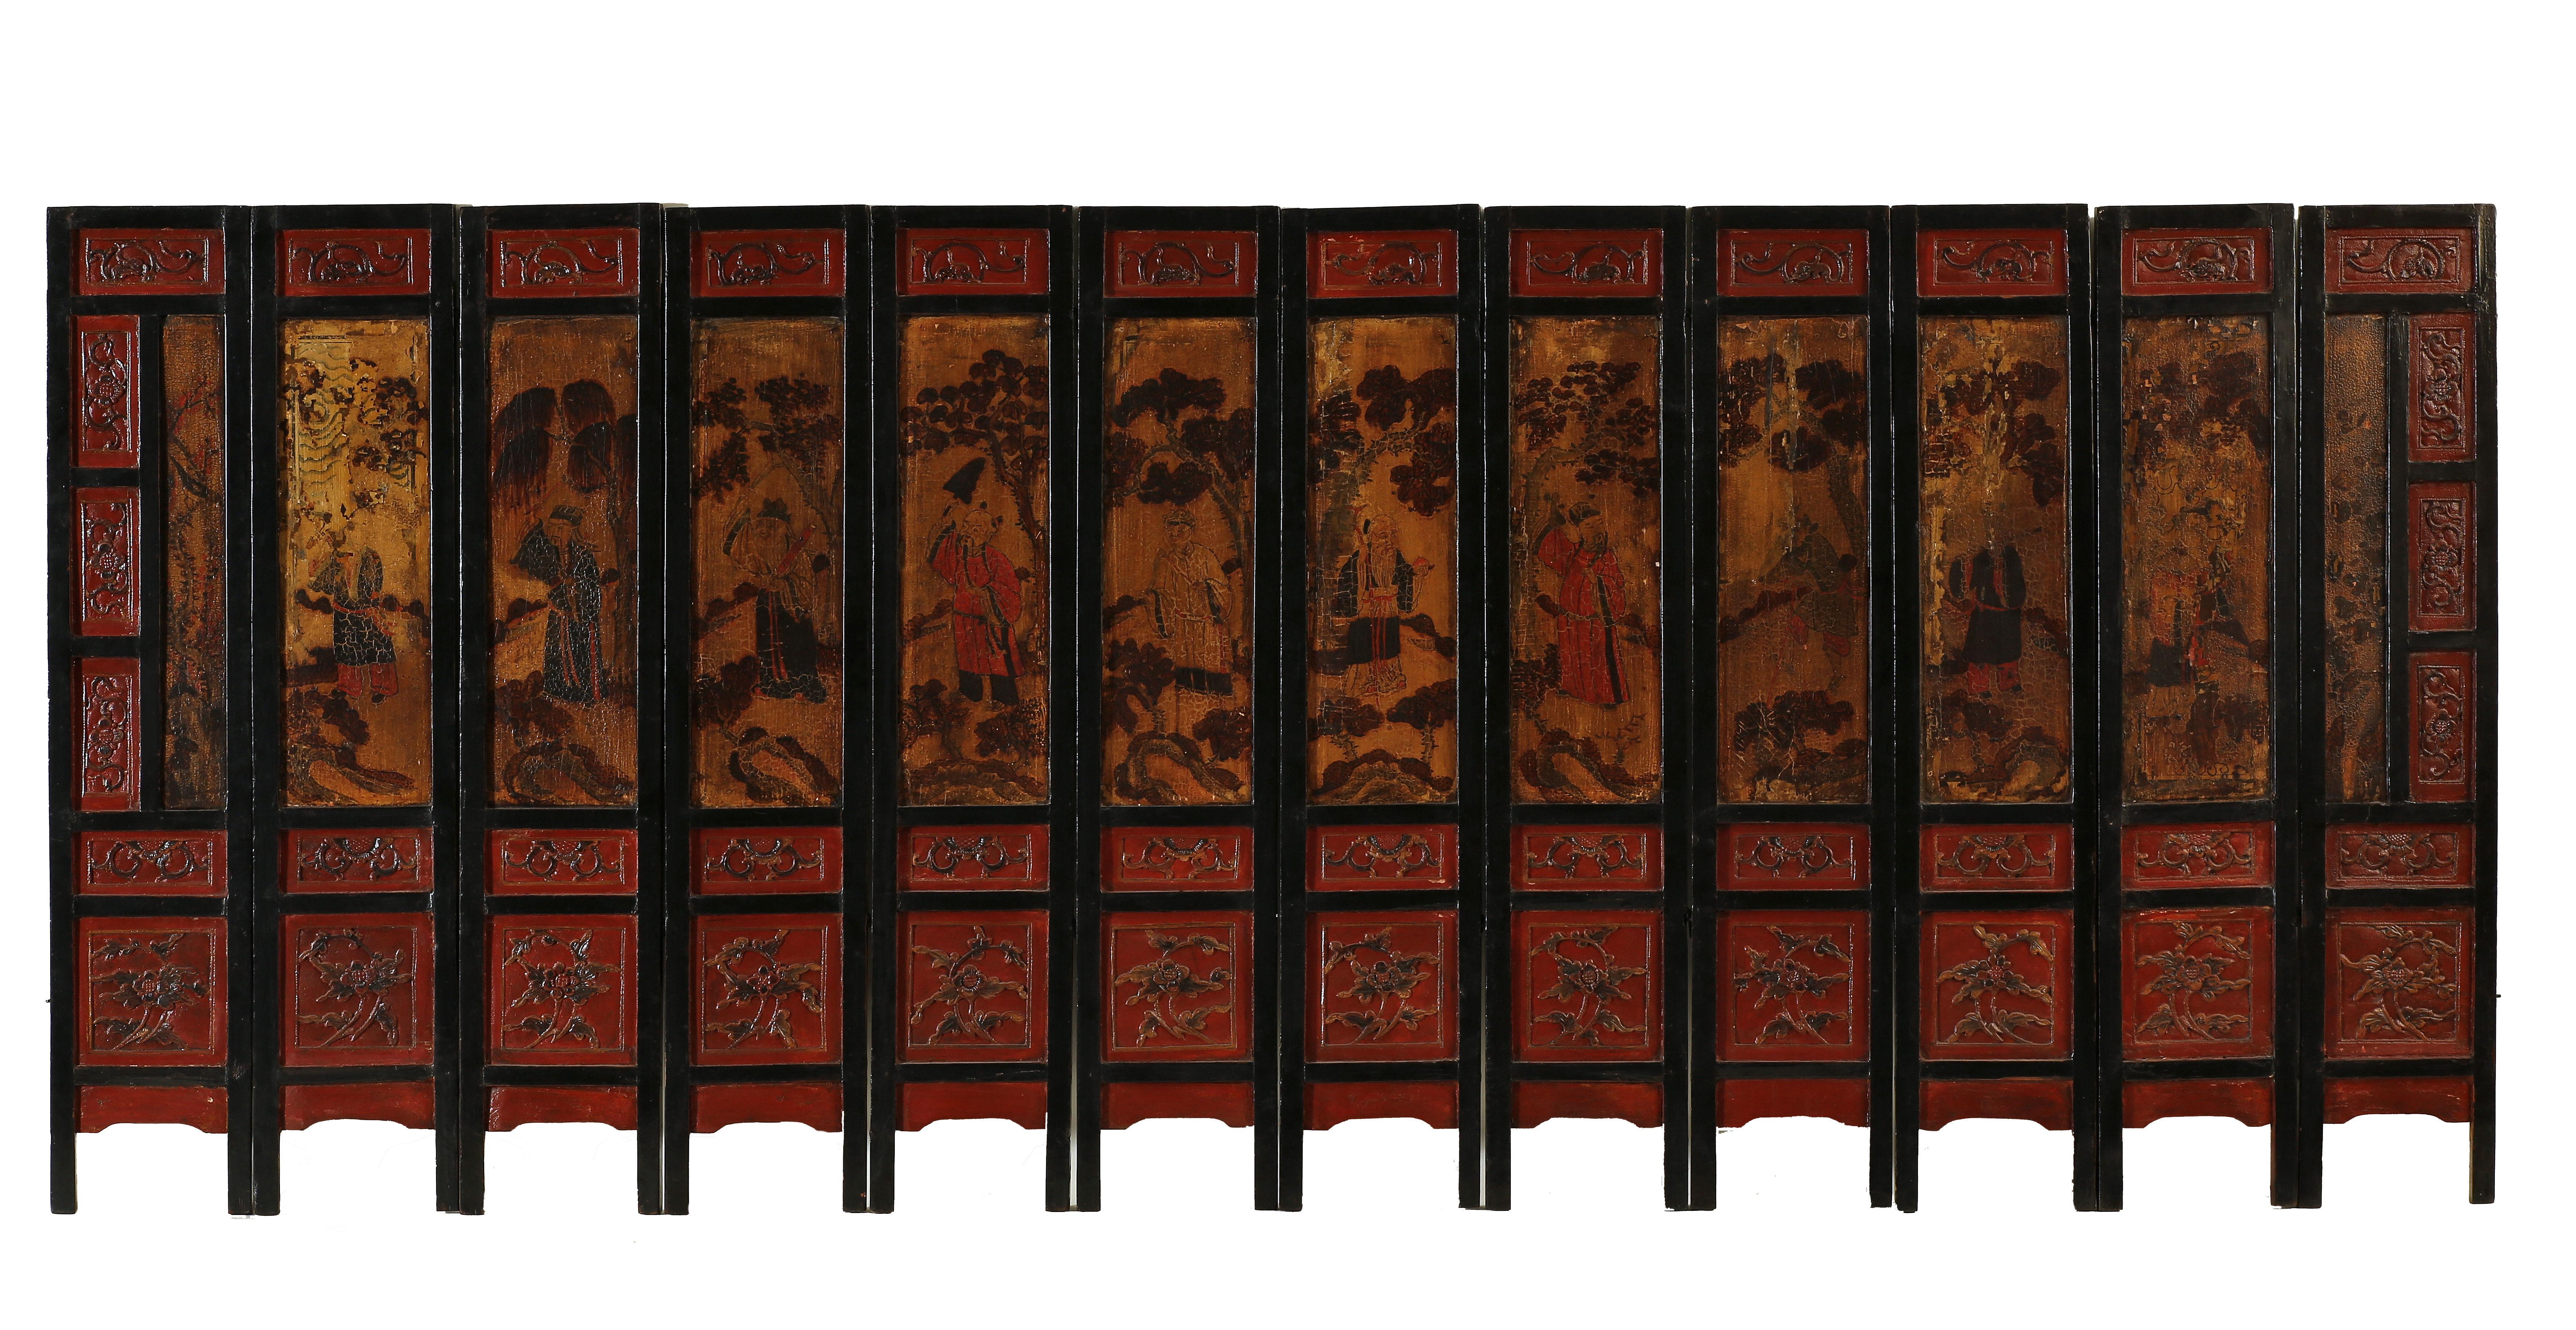 Commemorative table screen panels

The rare set of double-sided panels in sections with 8 immortals and scenic painting and relief-carved floral motifs on one side, and on the other side with gilt calligraphy and gilt relief-carved 8 immortals and